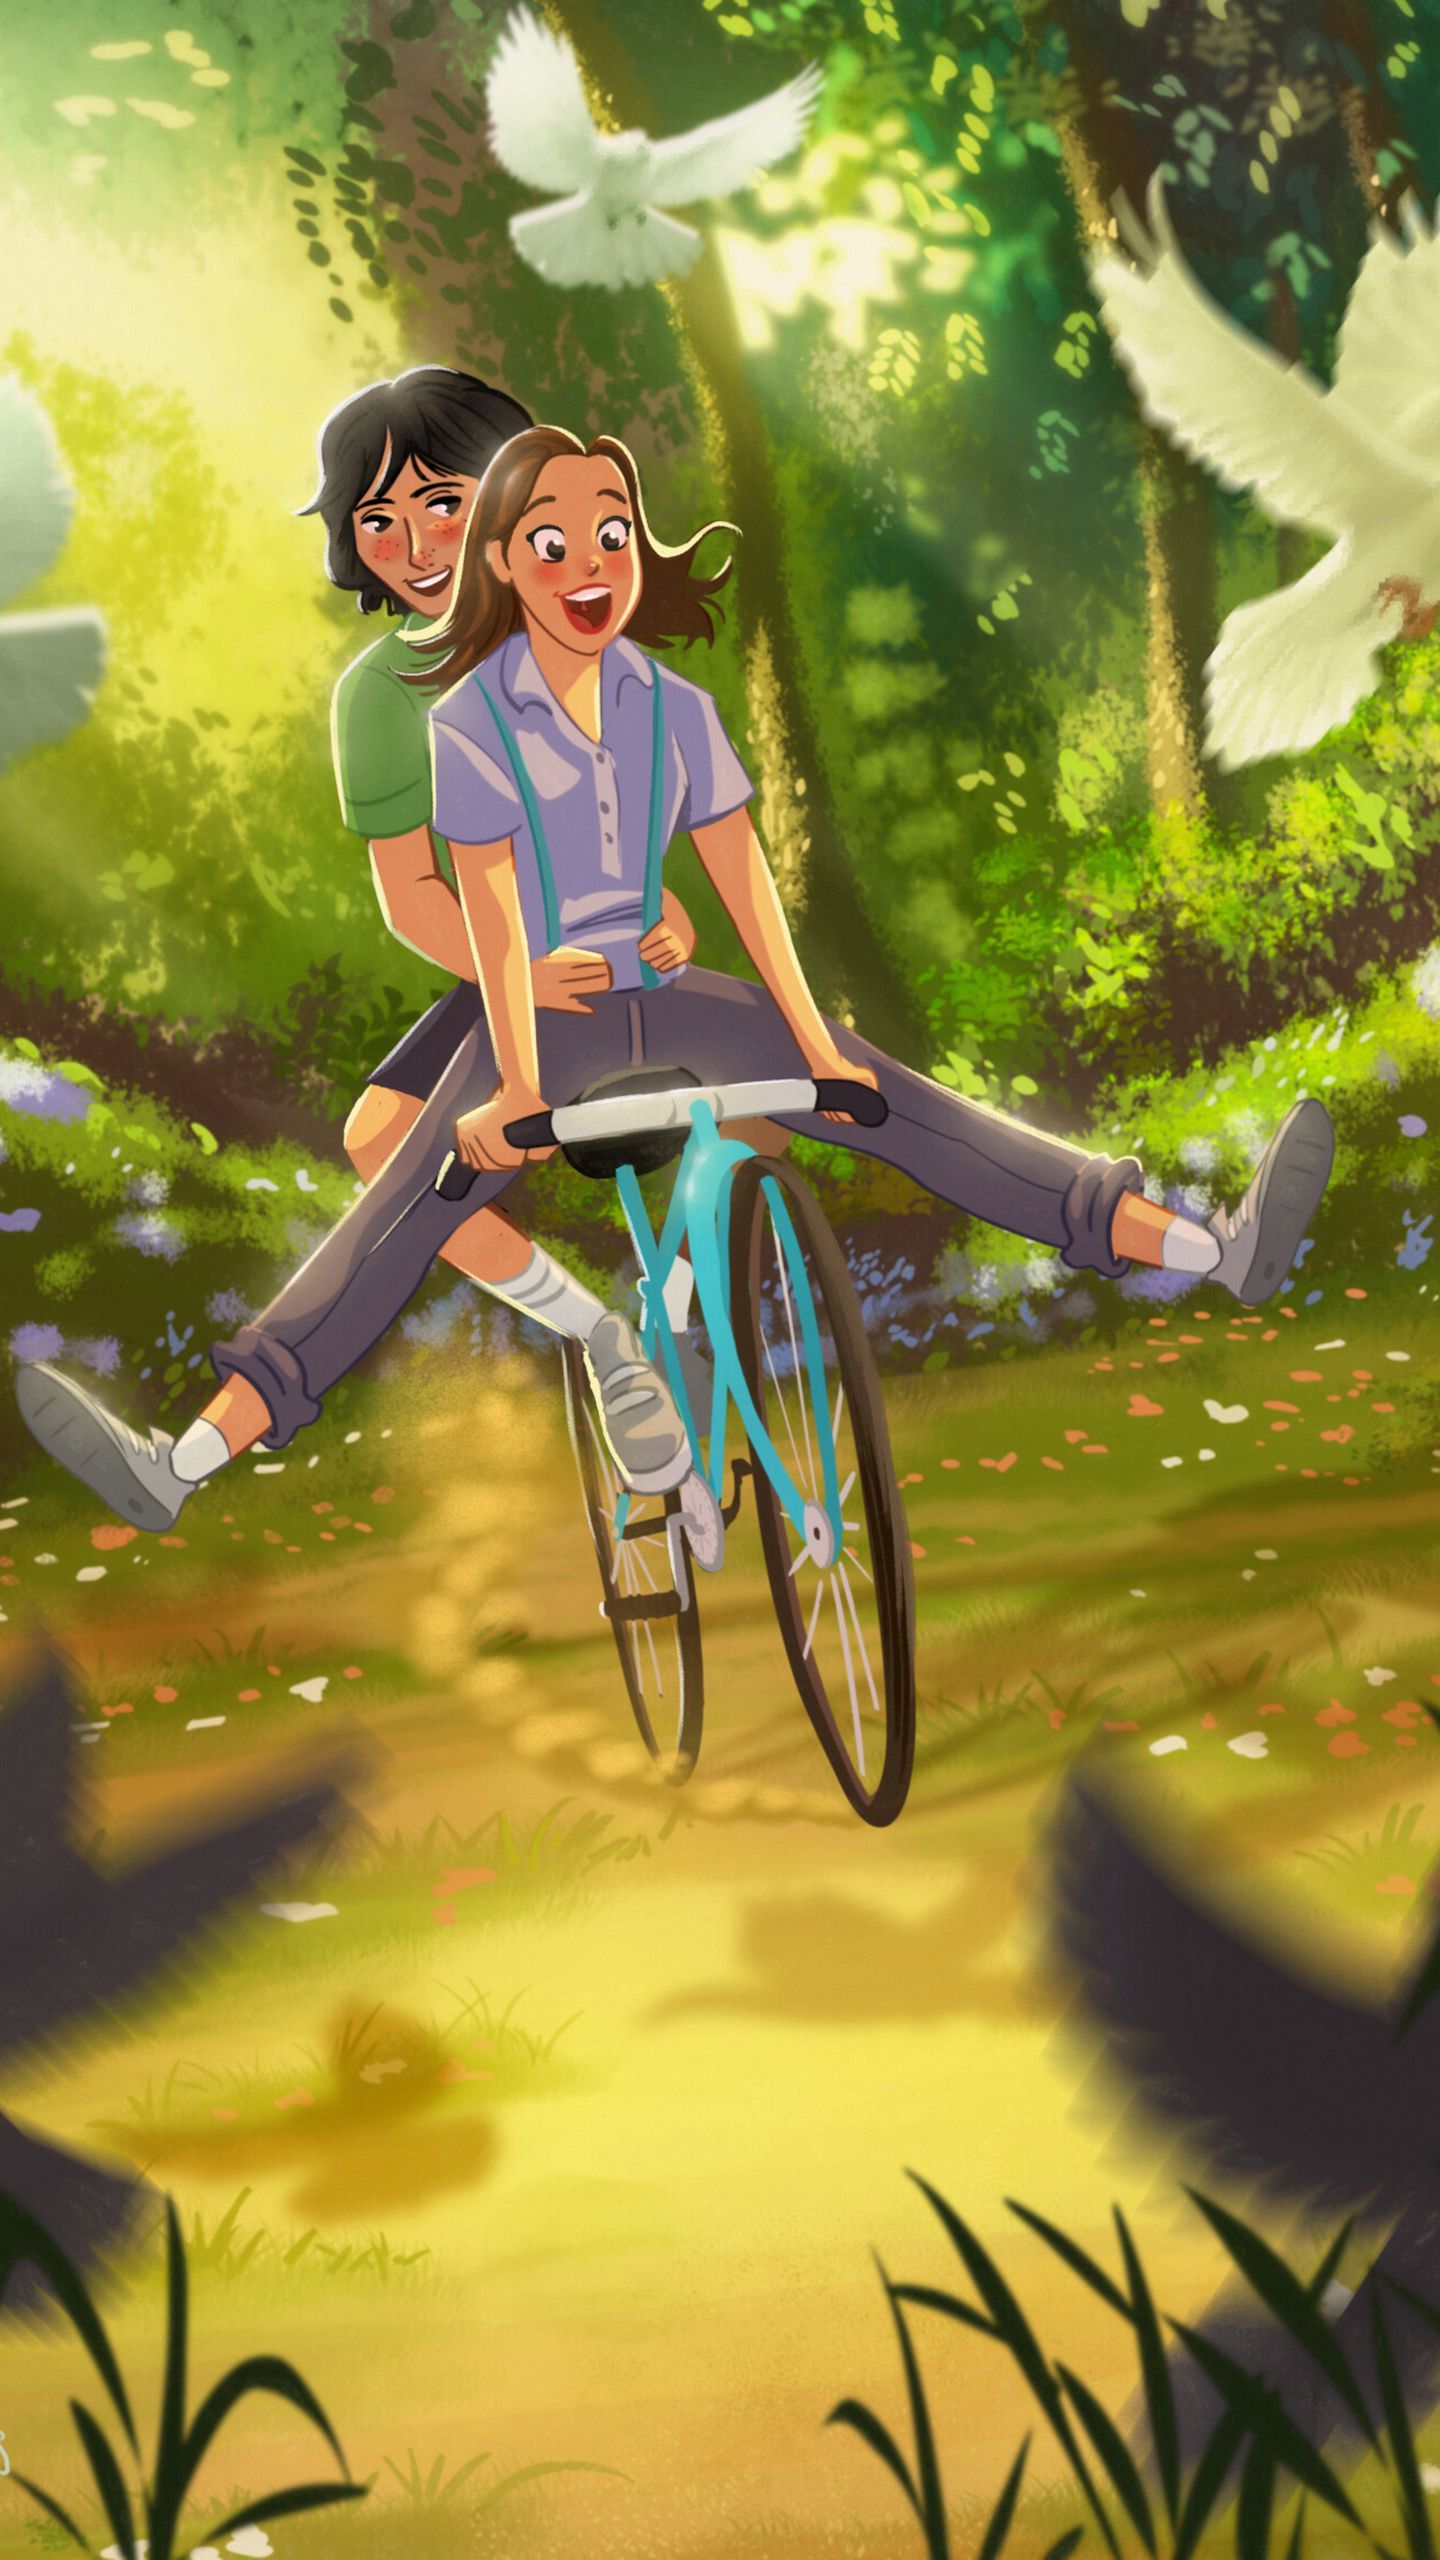 Download wallpaper 1440x2560 couple, bicycle, love, romance, art, happiness qhd samsung galaxy s s edge, note, lg g4 HD background